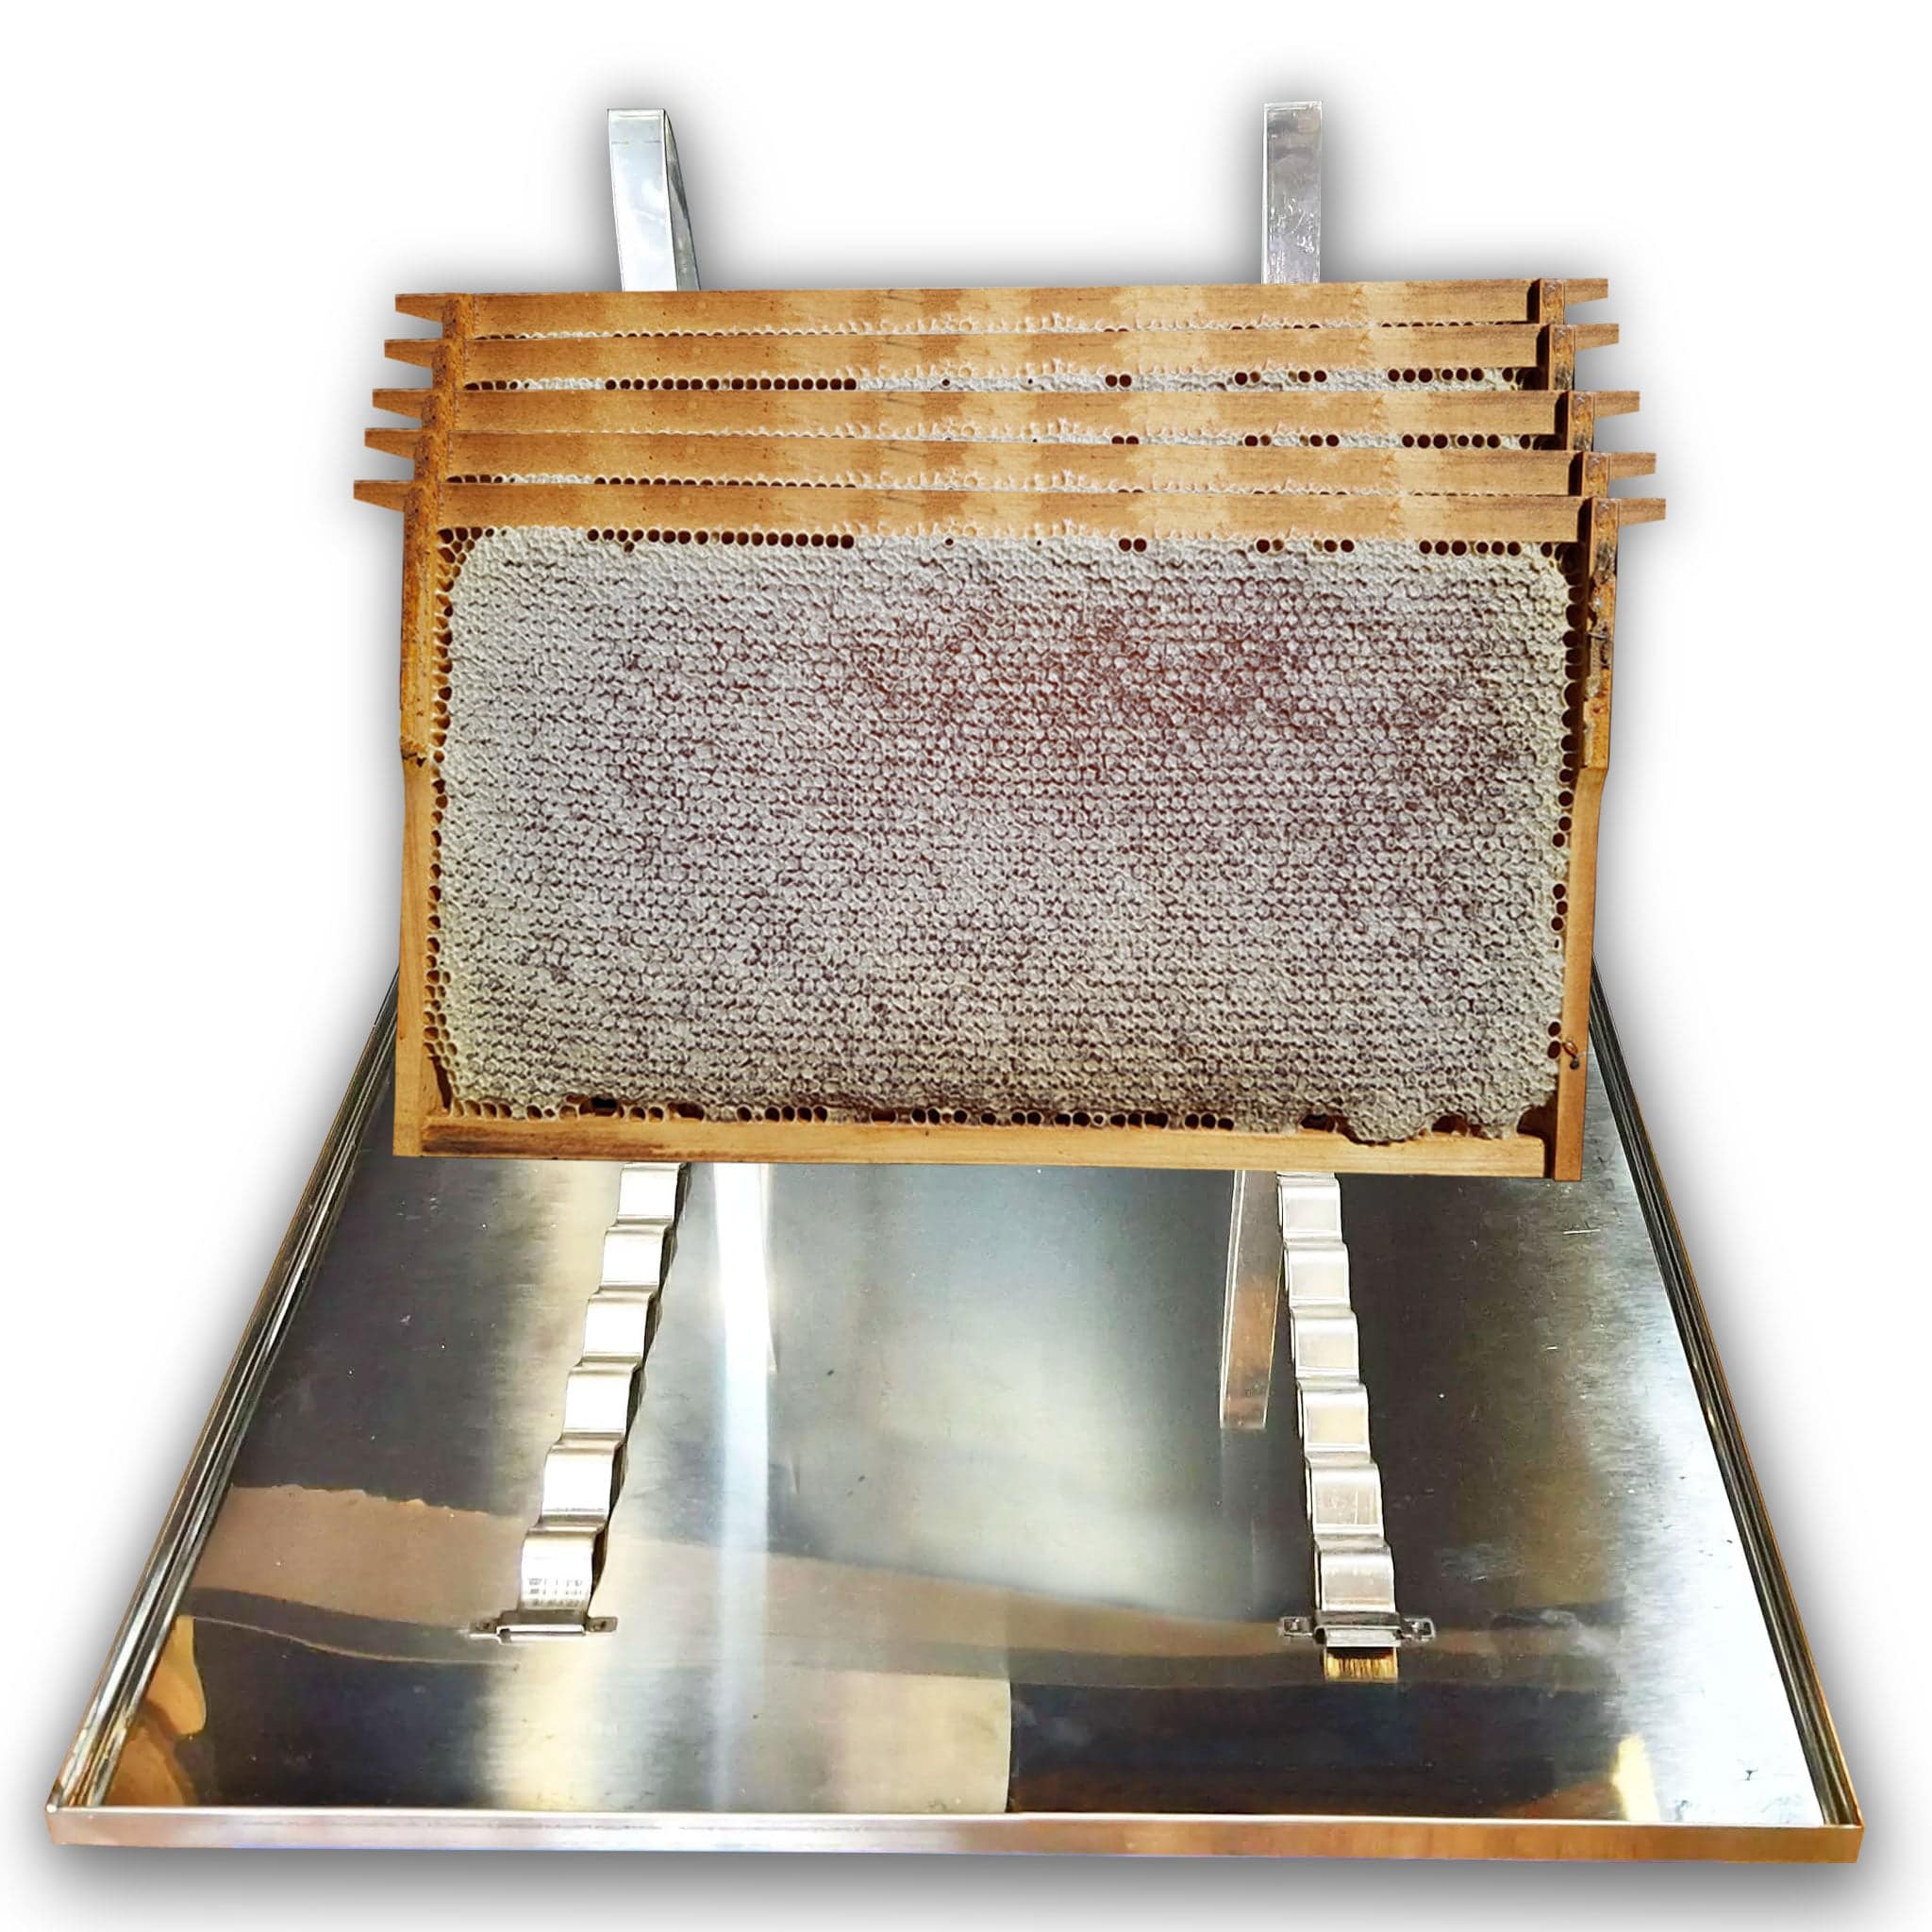 Beekeeping Uncapping and Preparation Tray - Processing collection by Buzzbee Beekeeping Supplies